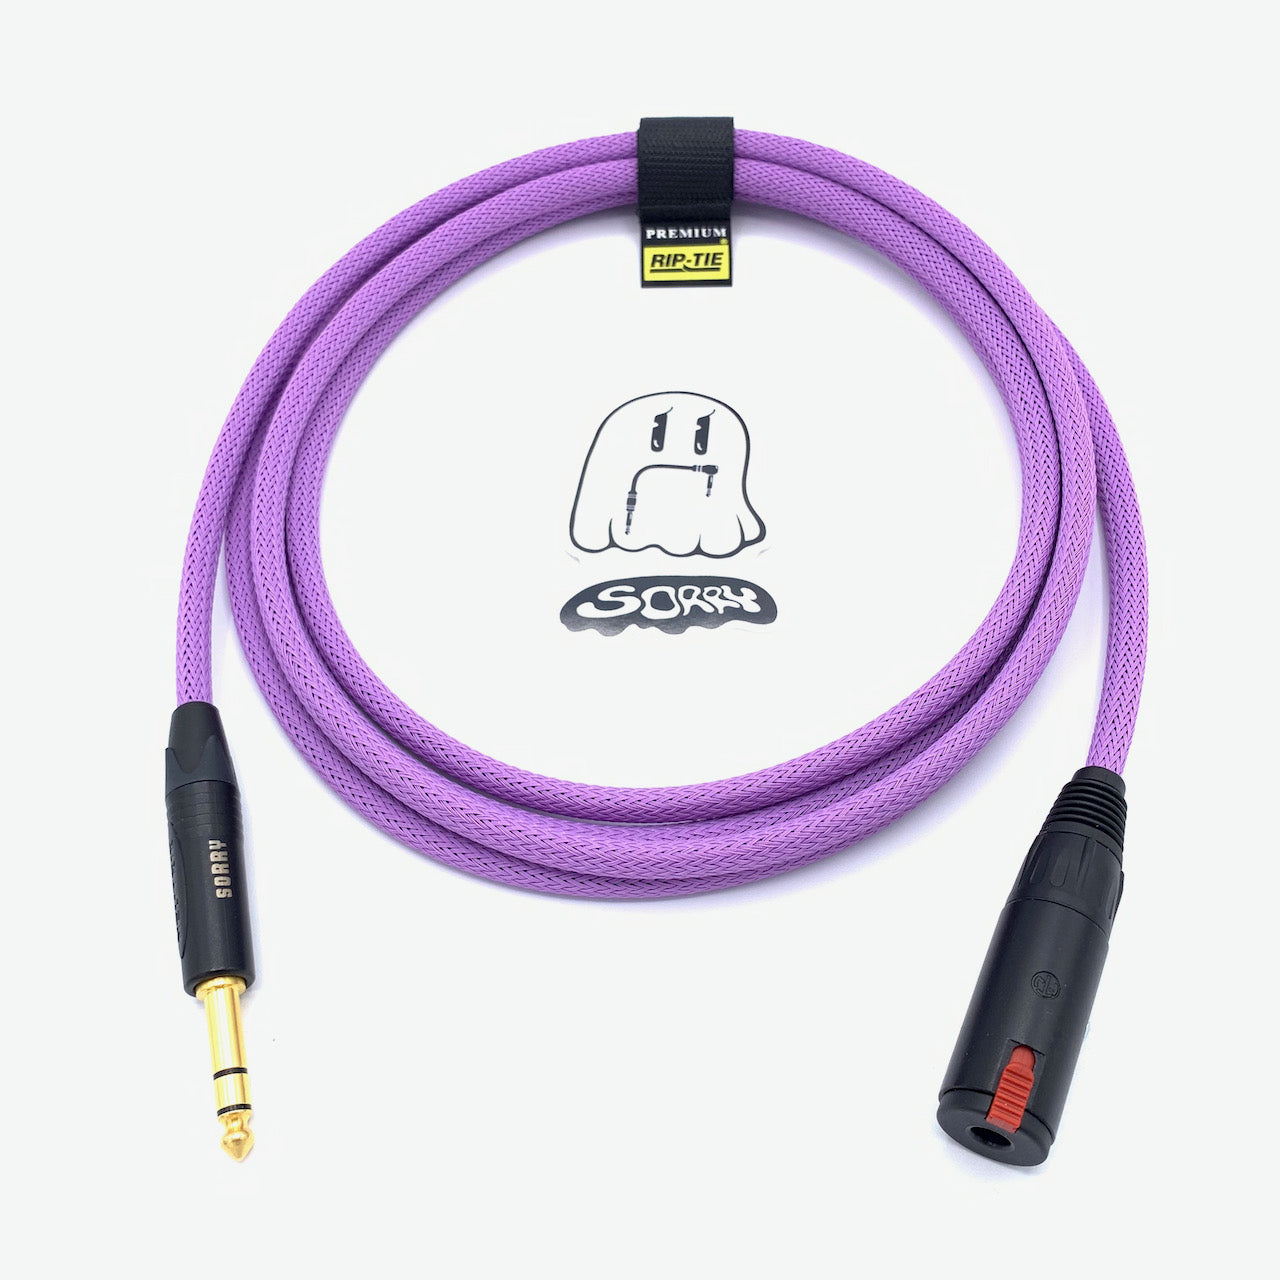 SORRY Locking Headphone Extension Cable - Lavender